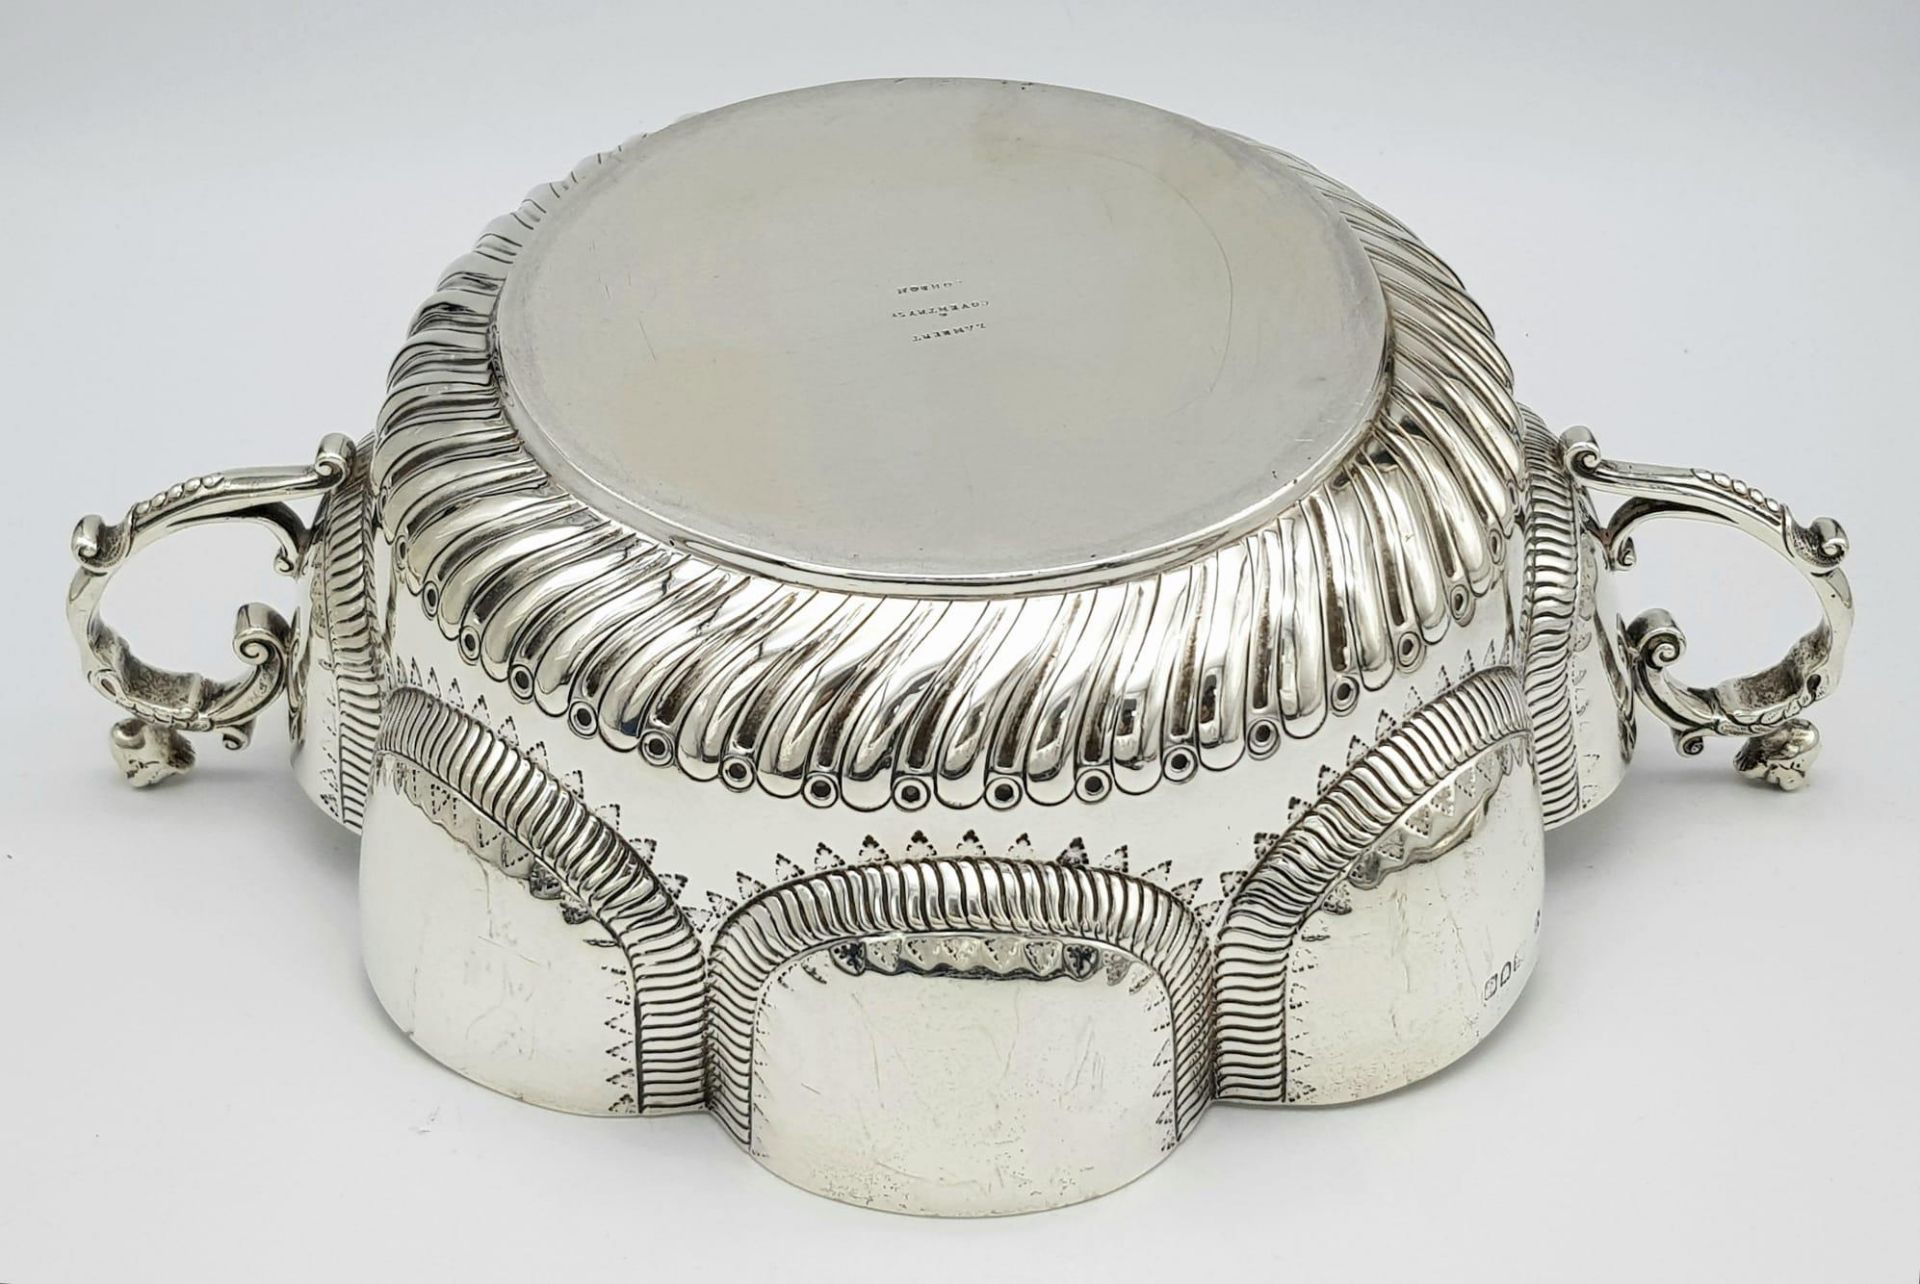 A BEAUTIFULLY ORNATE HAND ENGRAVED SOLID SILVER PUNCH BOWL MADE BY LAMBERT OF COVENTRY STREET , - Image 5 of 7